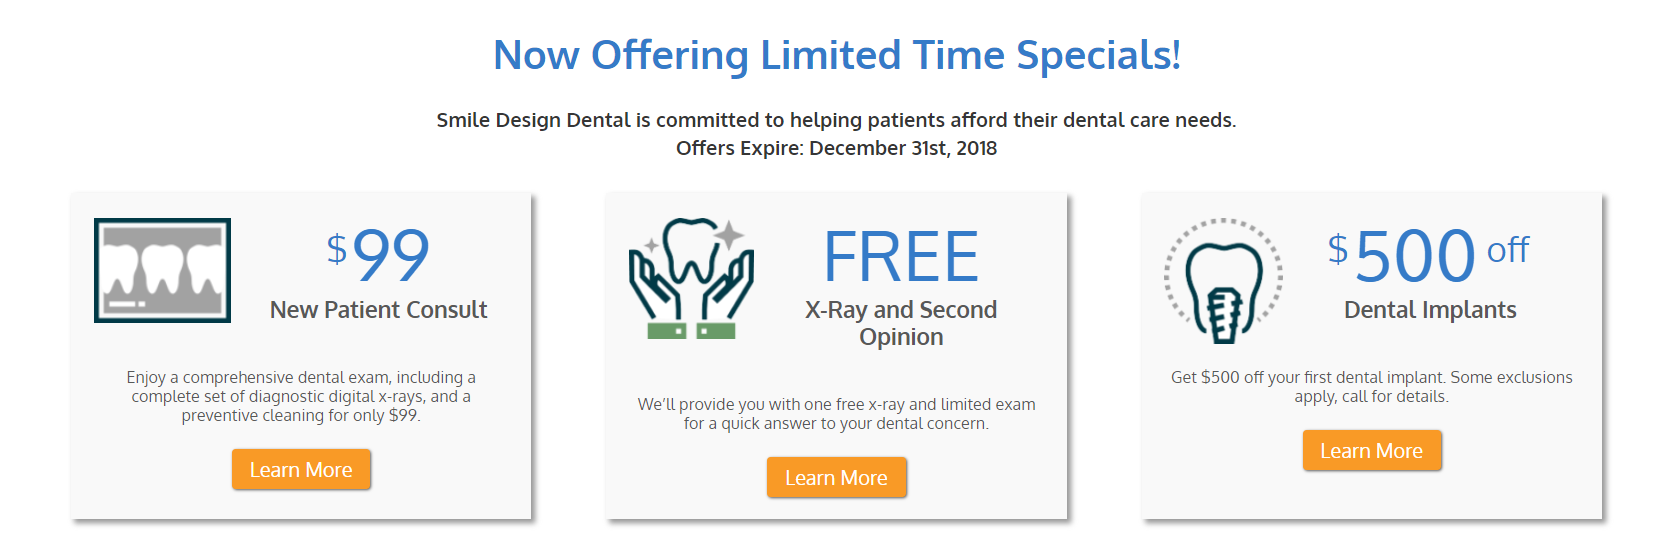 screenshot of limited time special offers on a dental website